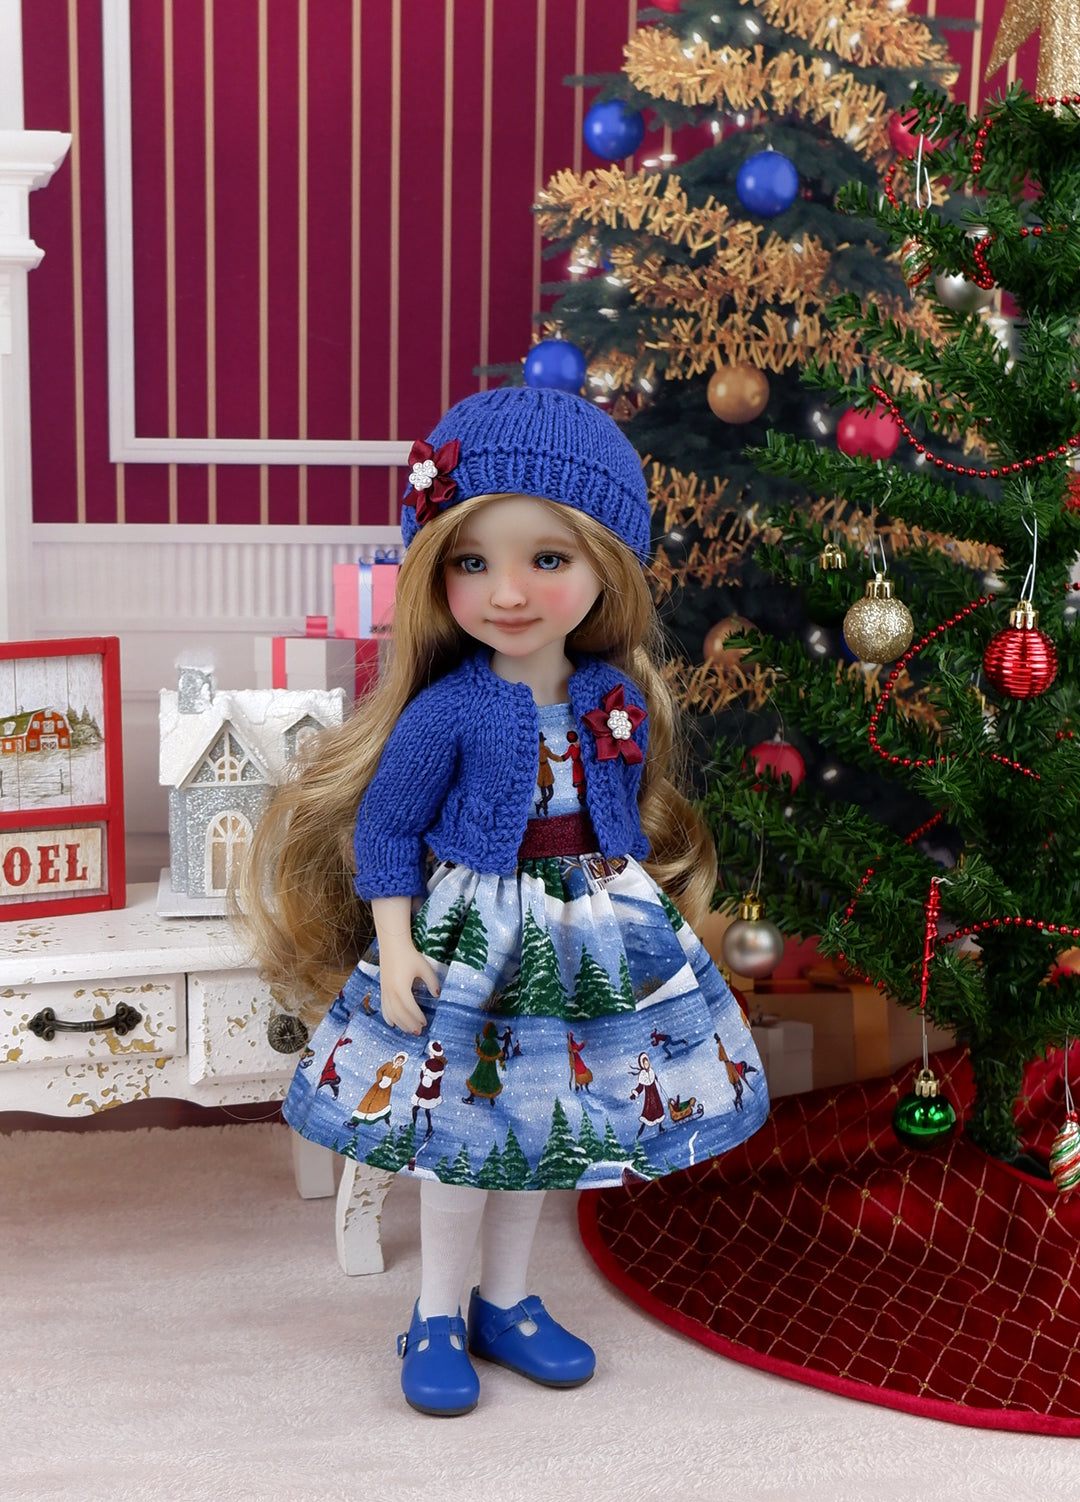 Frozen Pond - dress and sweater set with shoes for Ruby Red Fashion Friends doll